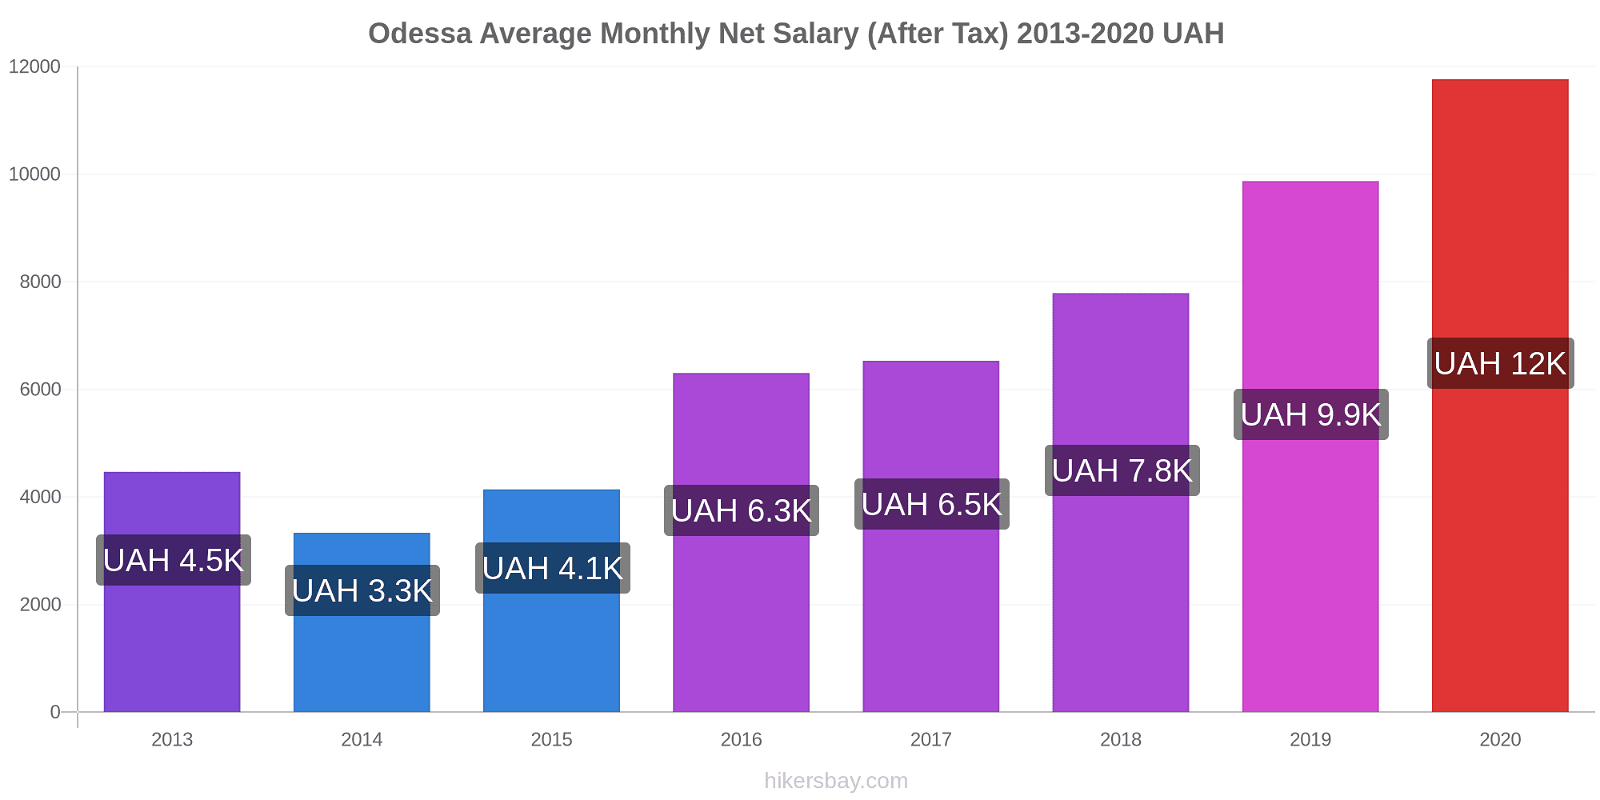 Odessa price changes Average Monthly Net Salary (After Tax) hikersbay.com